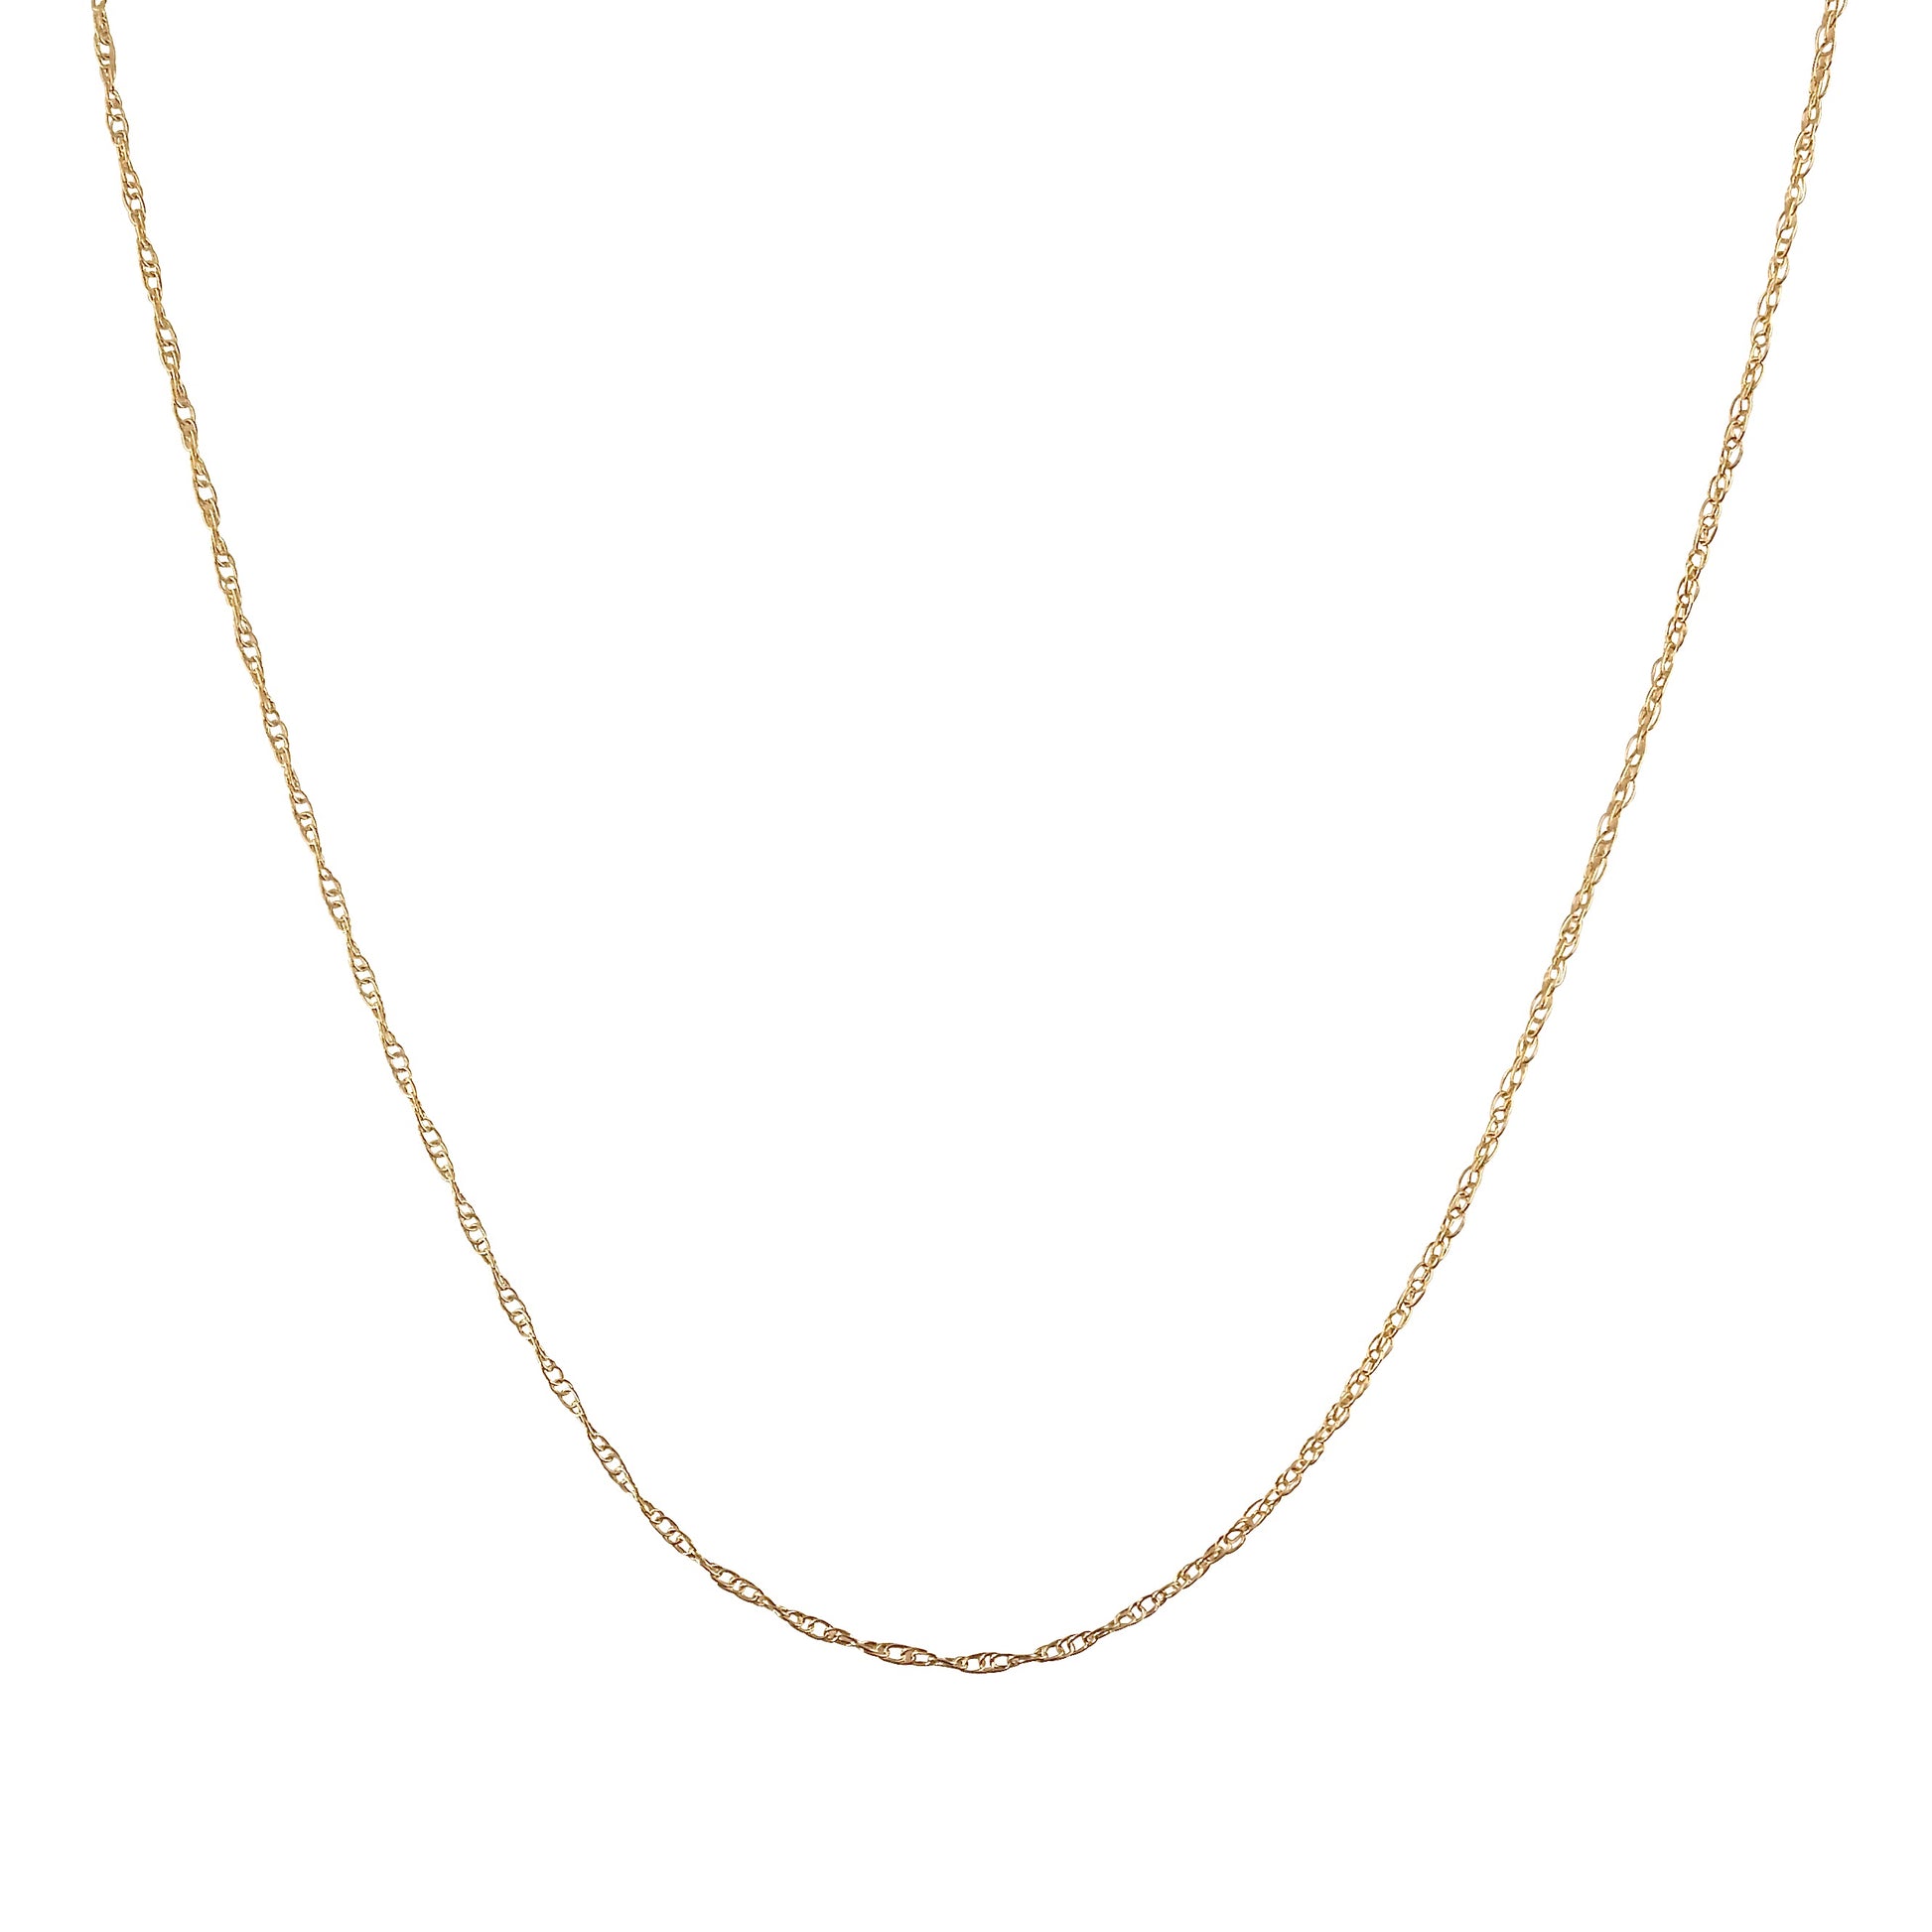 Fine gold filled rope chain